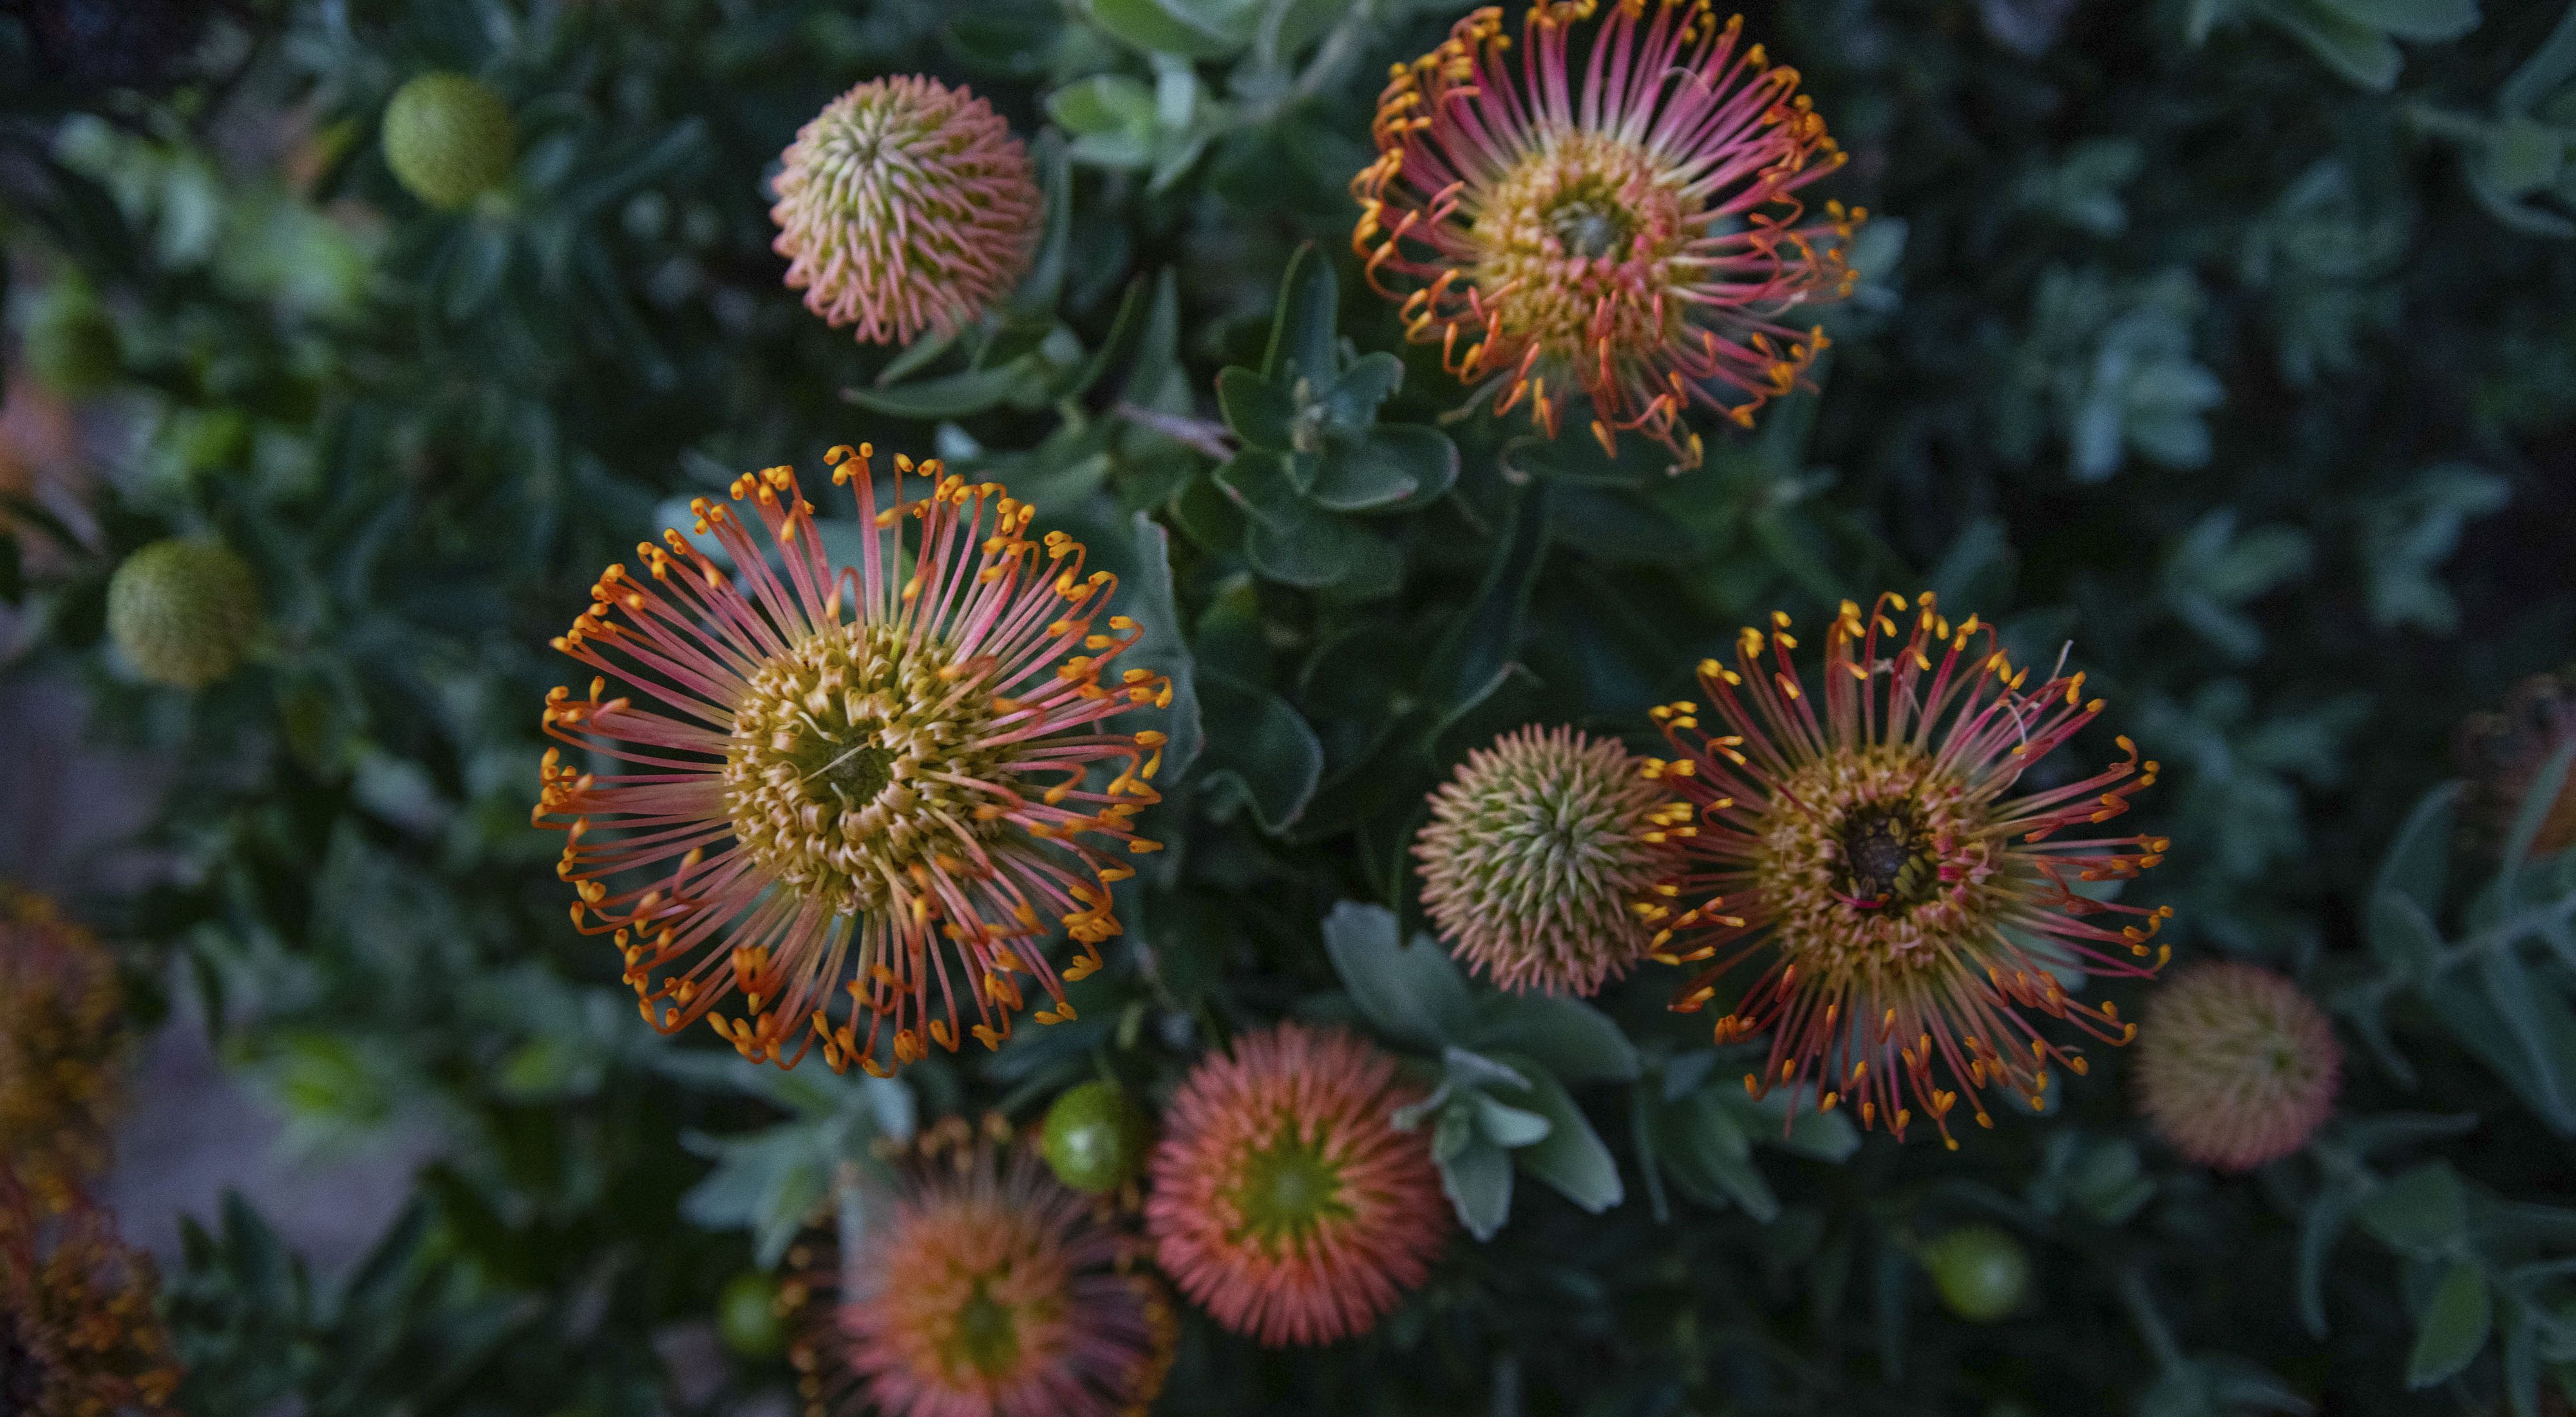 The pincushion protea is endemic to the Southwestern Cape fynbos ecosystem.